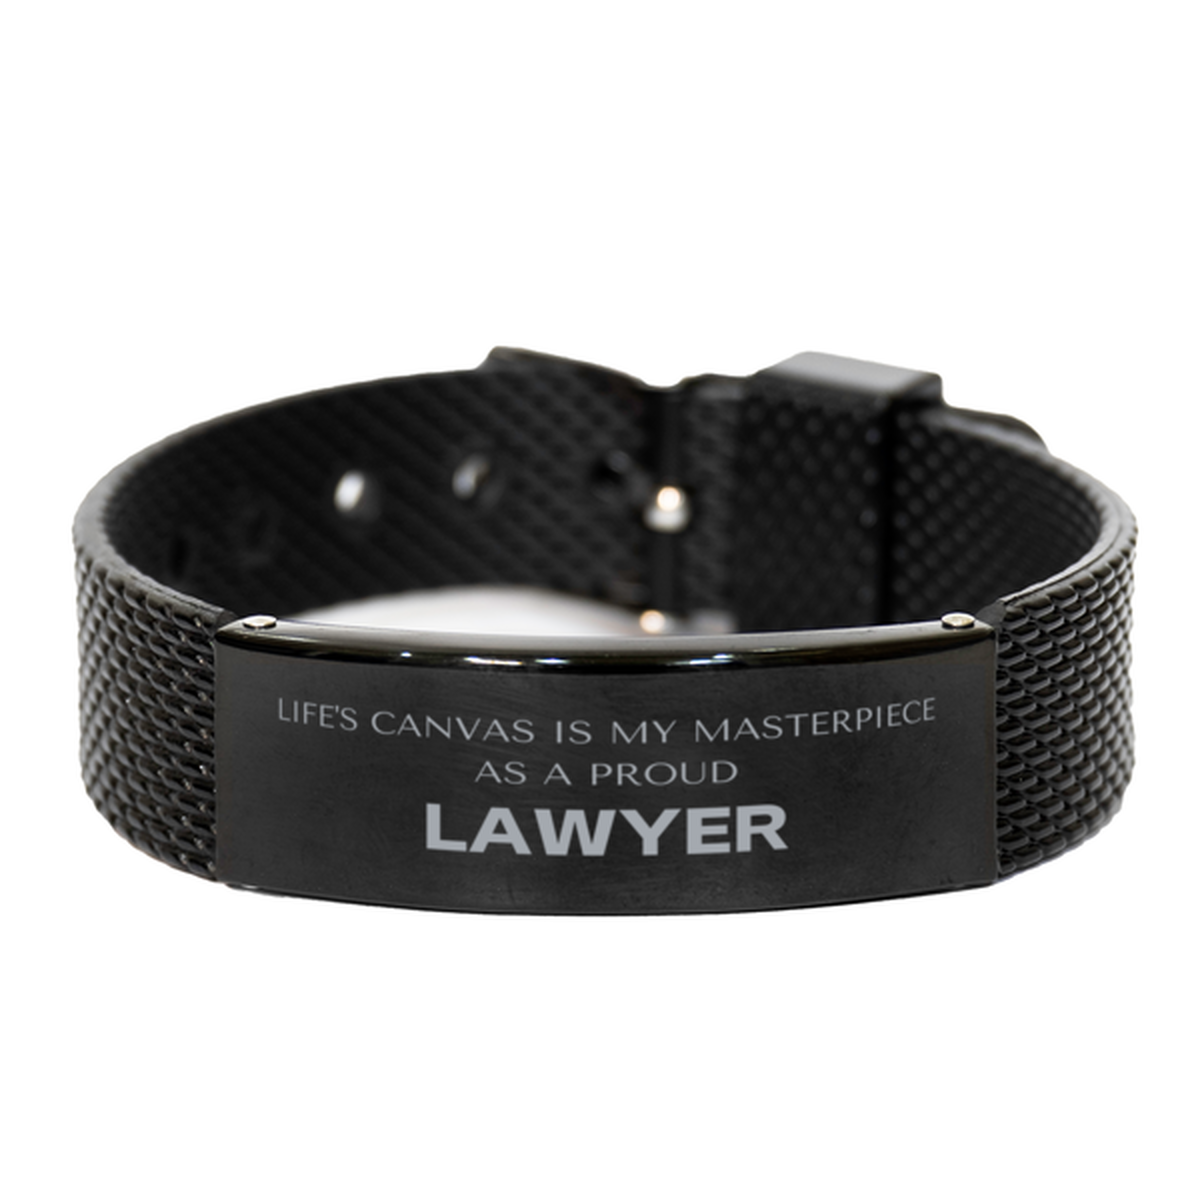 Proud Lawyer Gifts, Life's canvas is my masterpiece, Epic Birthday Christmas Unique Black Shark Mesh Bracelet For Lawyer, Coworkers, Men, Women, Friends